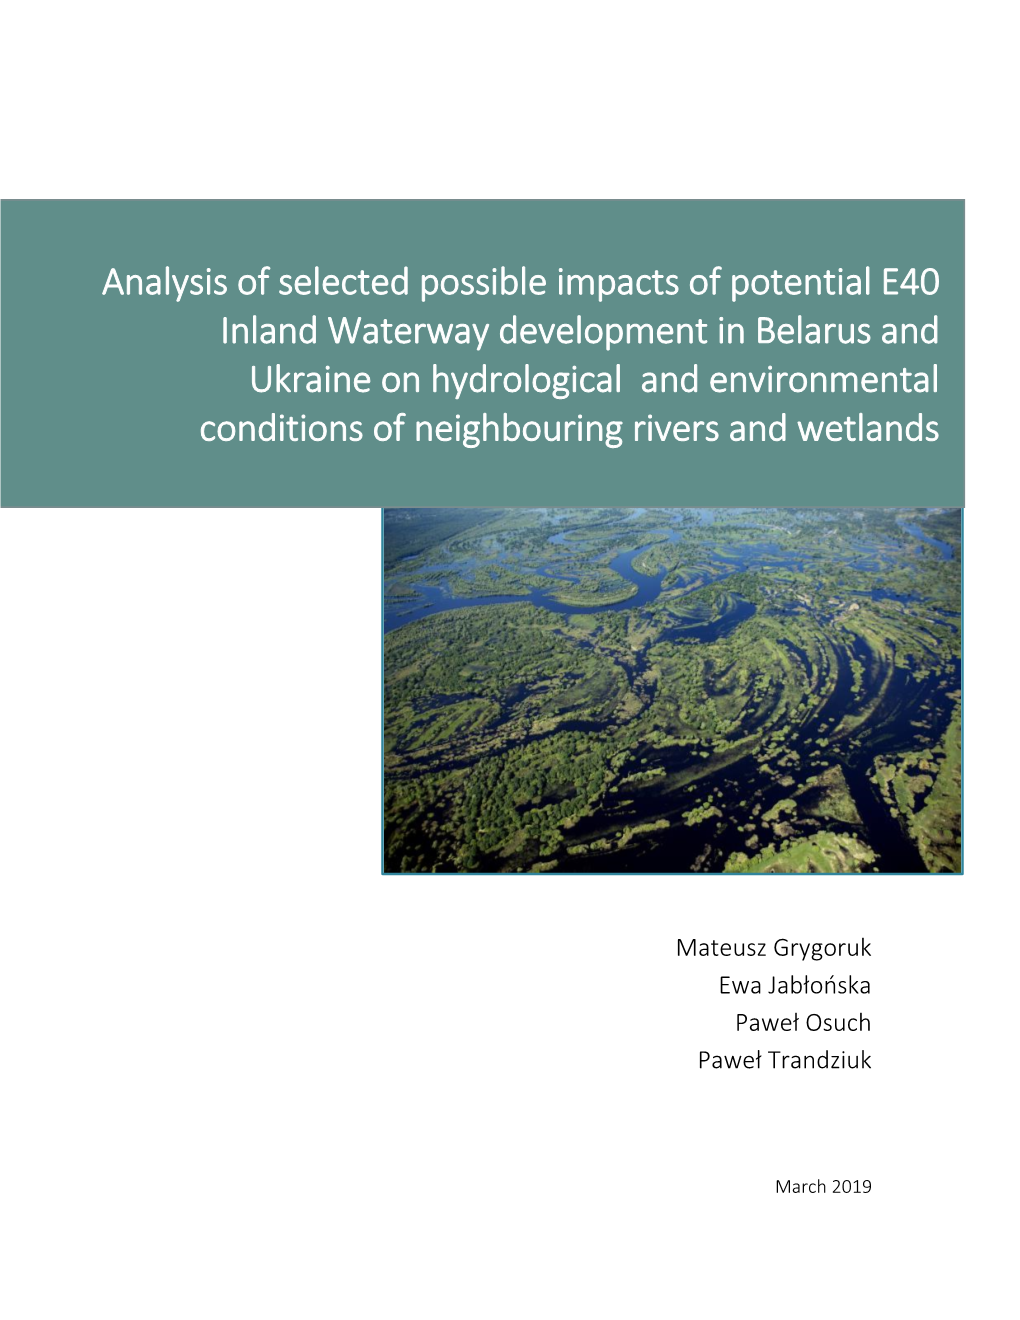 Analysis of Selected Possible Impacts of Potential E40 Inland Waterway